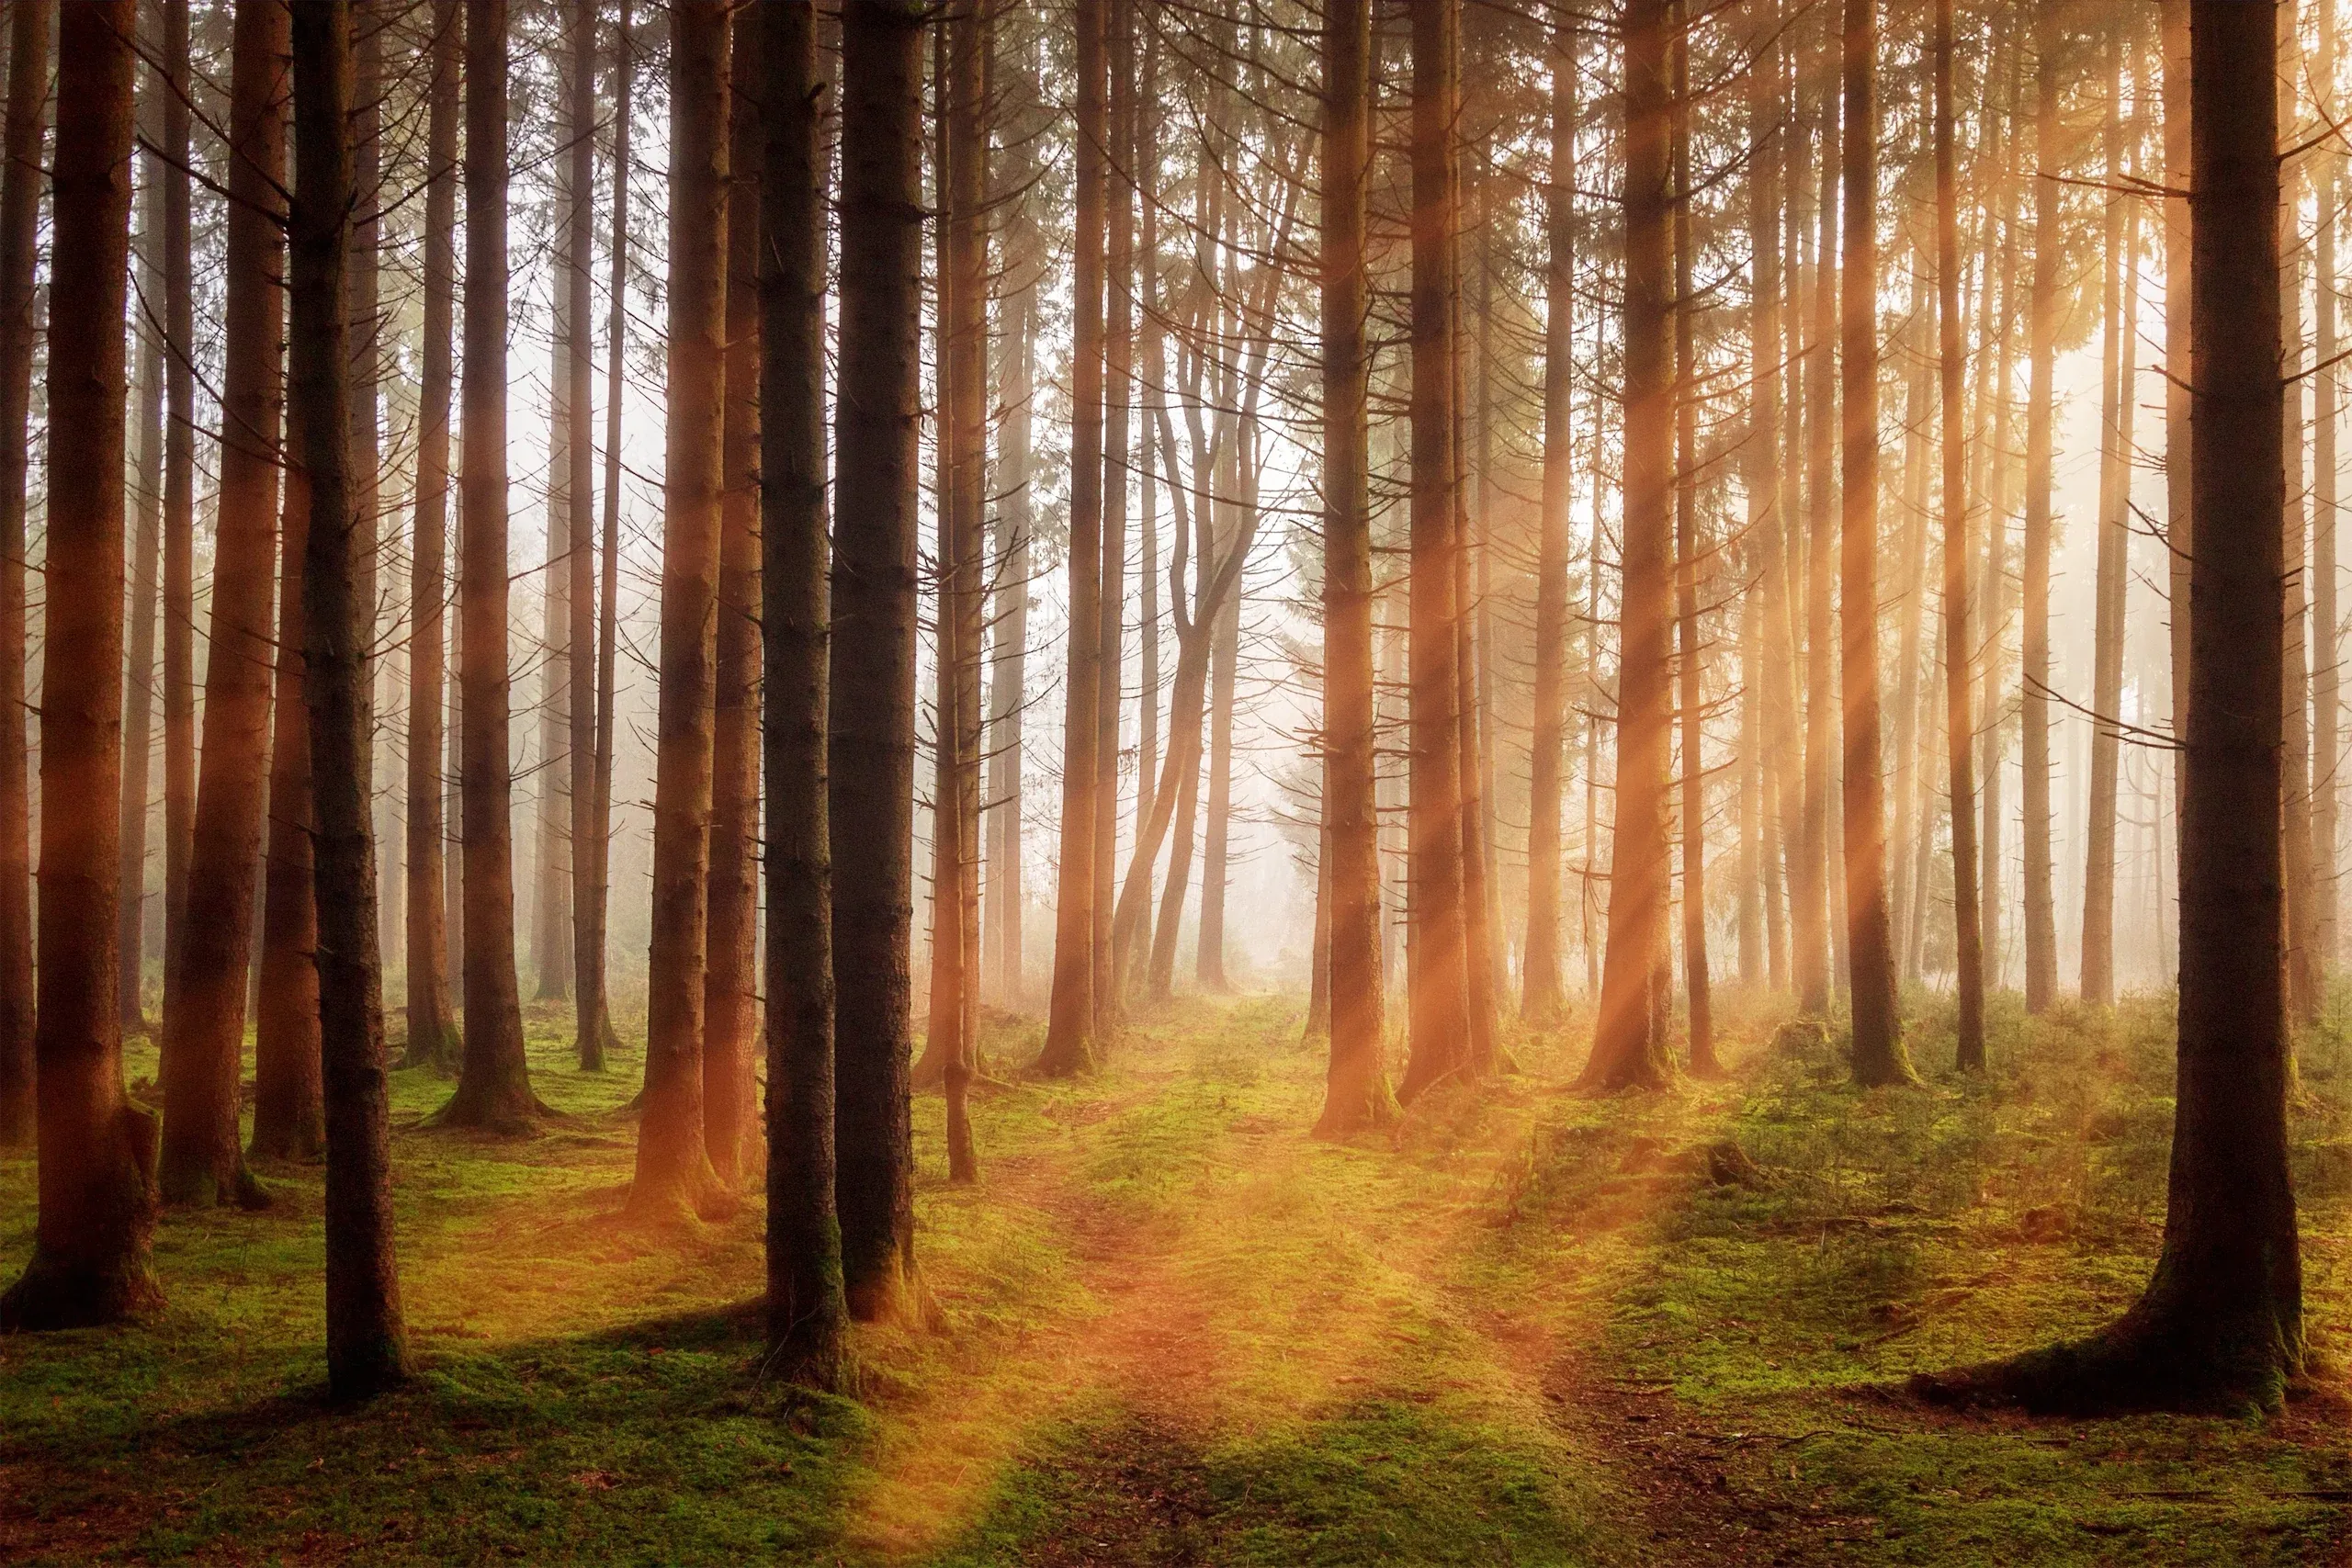 A beautiful picture of the morning sunlight casting sun rays through the forest